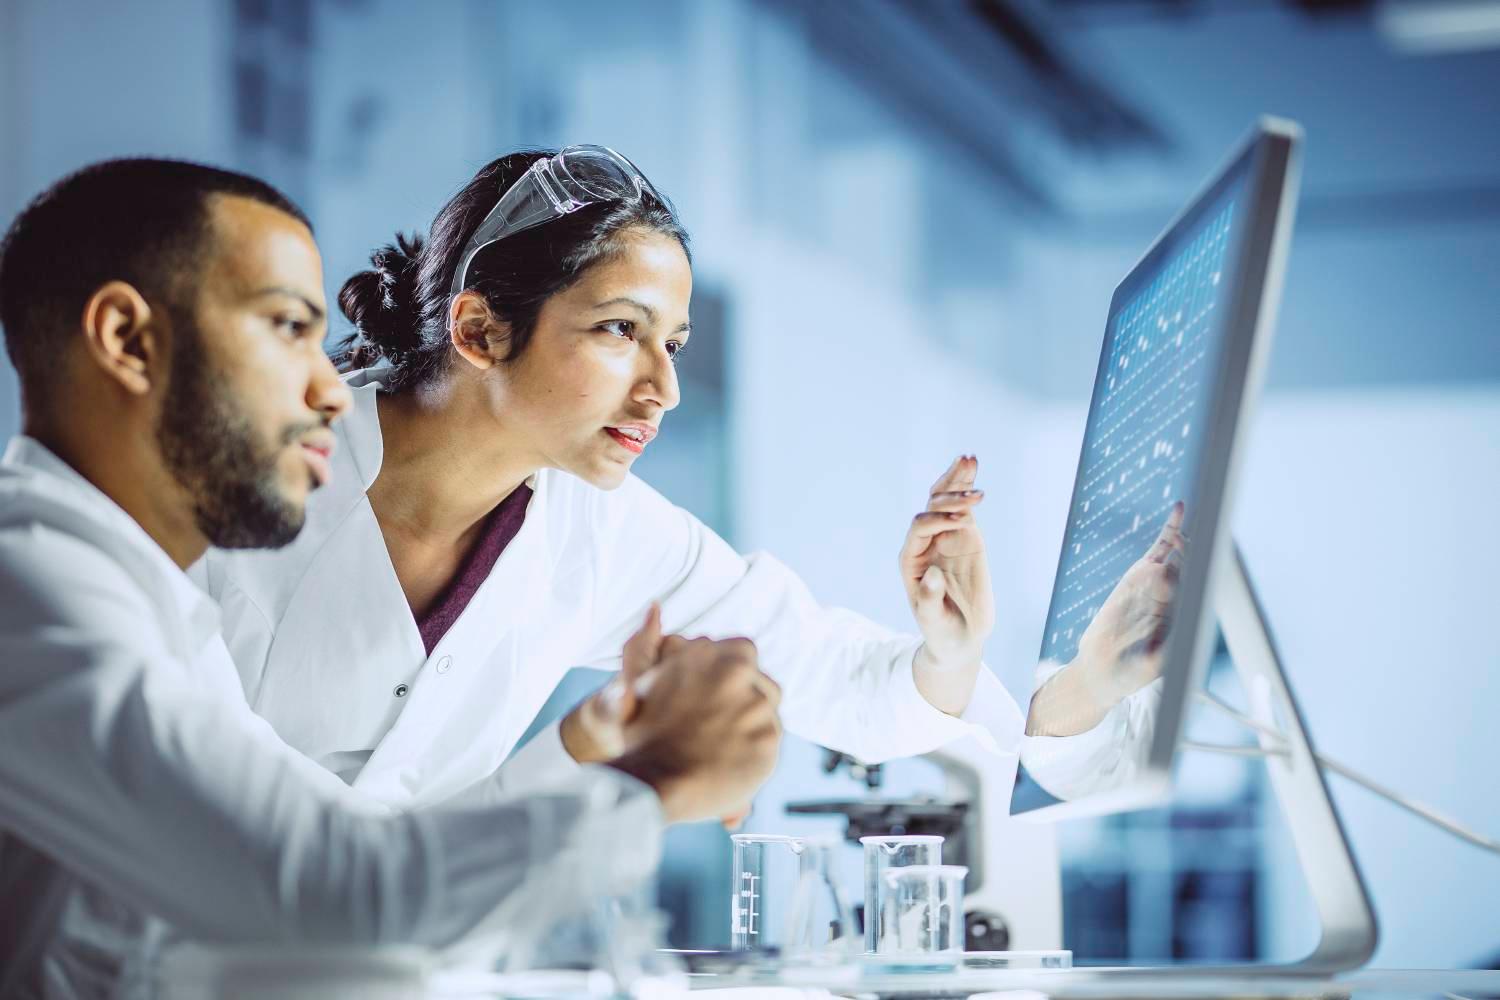 Two scientists in white lab coats reviewing results on a monitor.